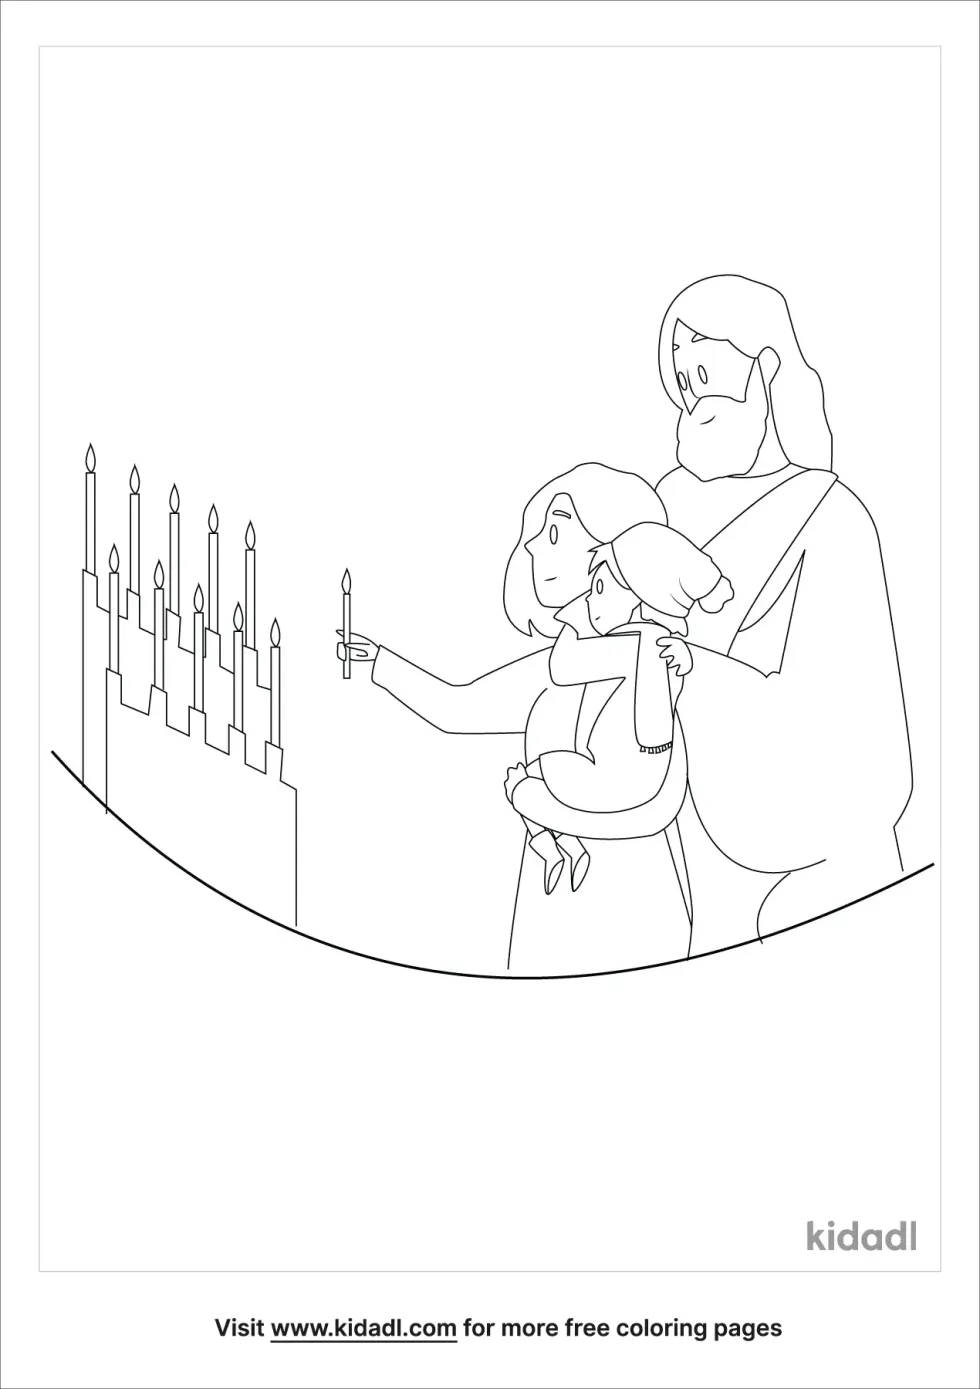 Prophet And Child Coloring Page